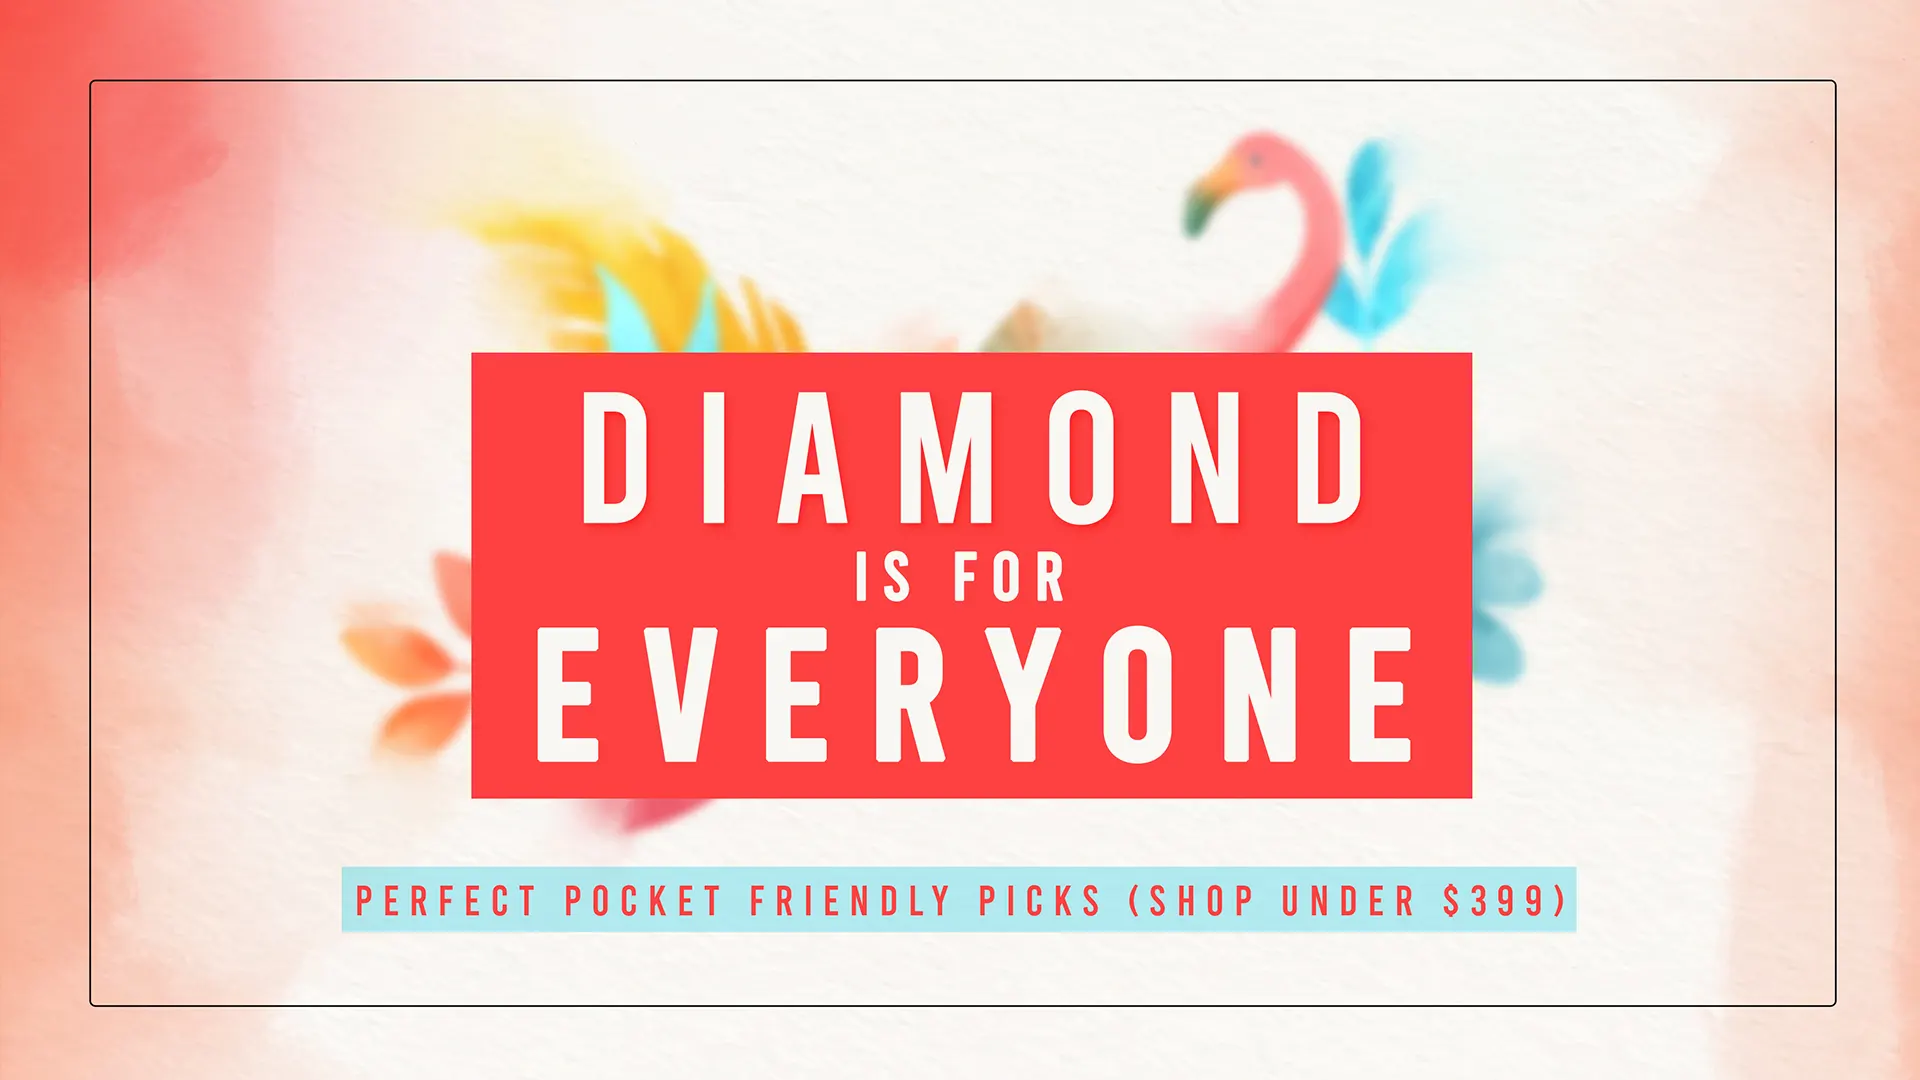 Diamond is for Everyone